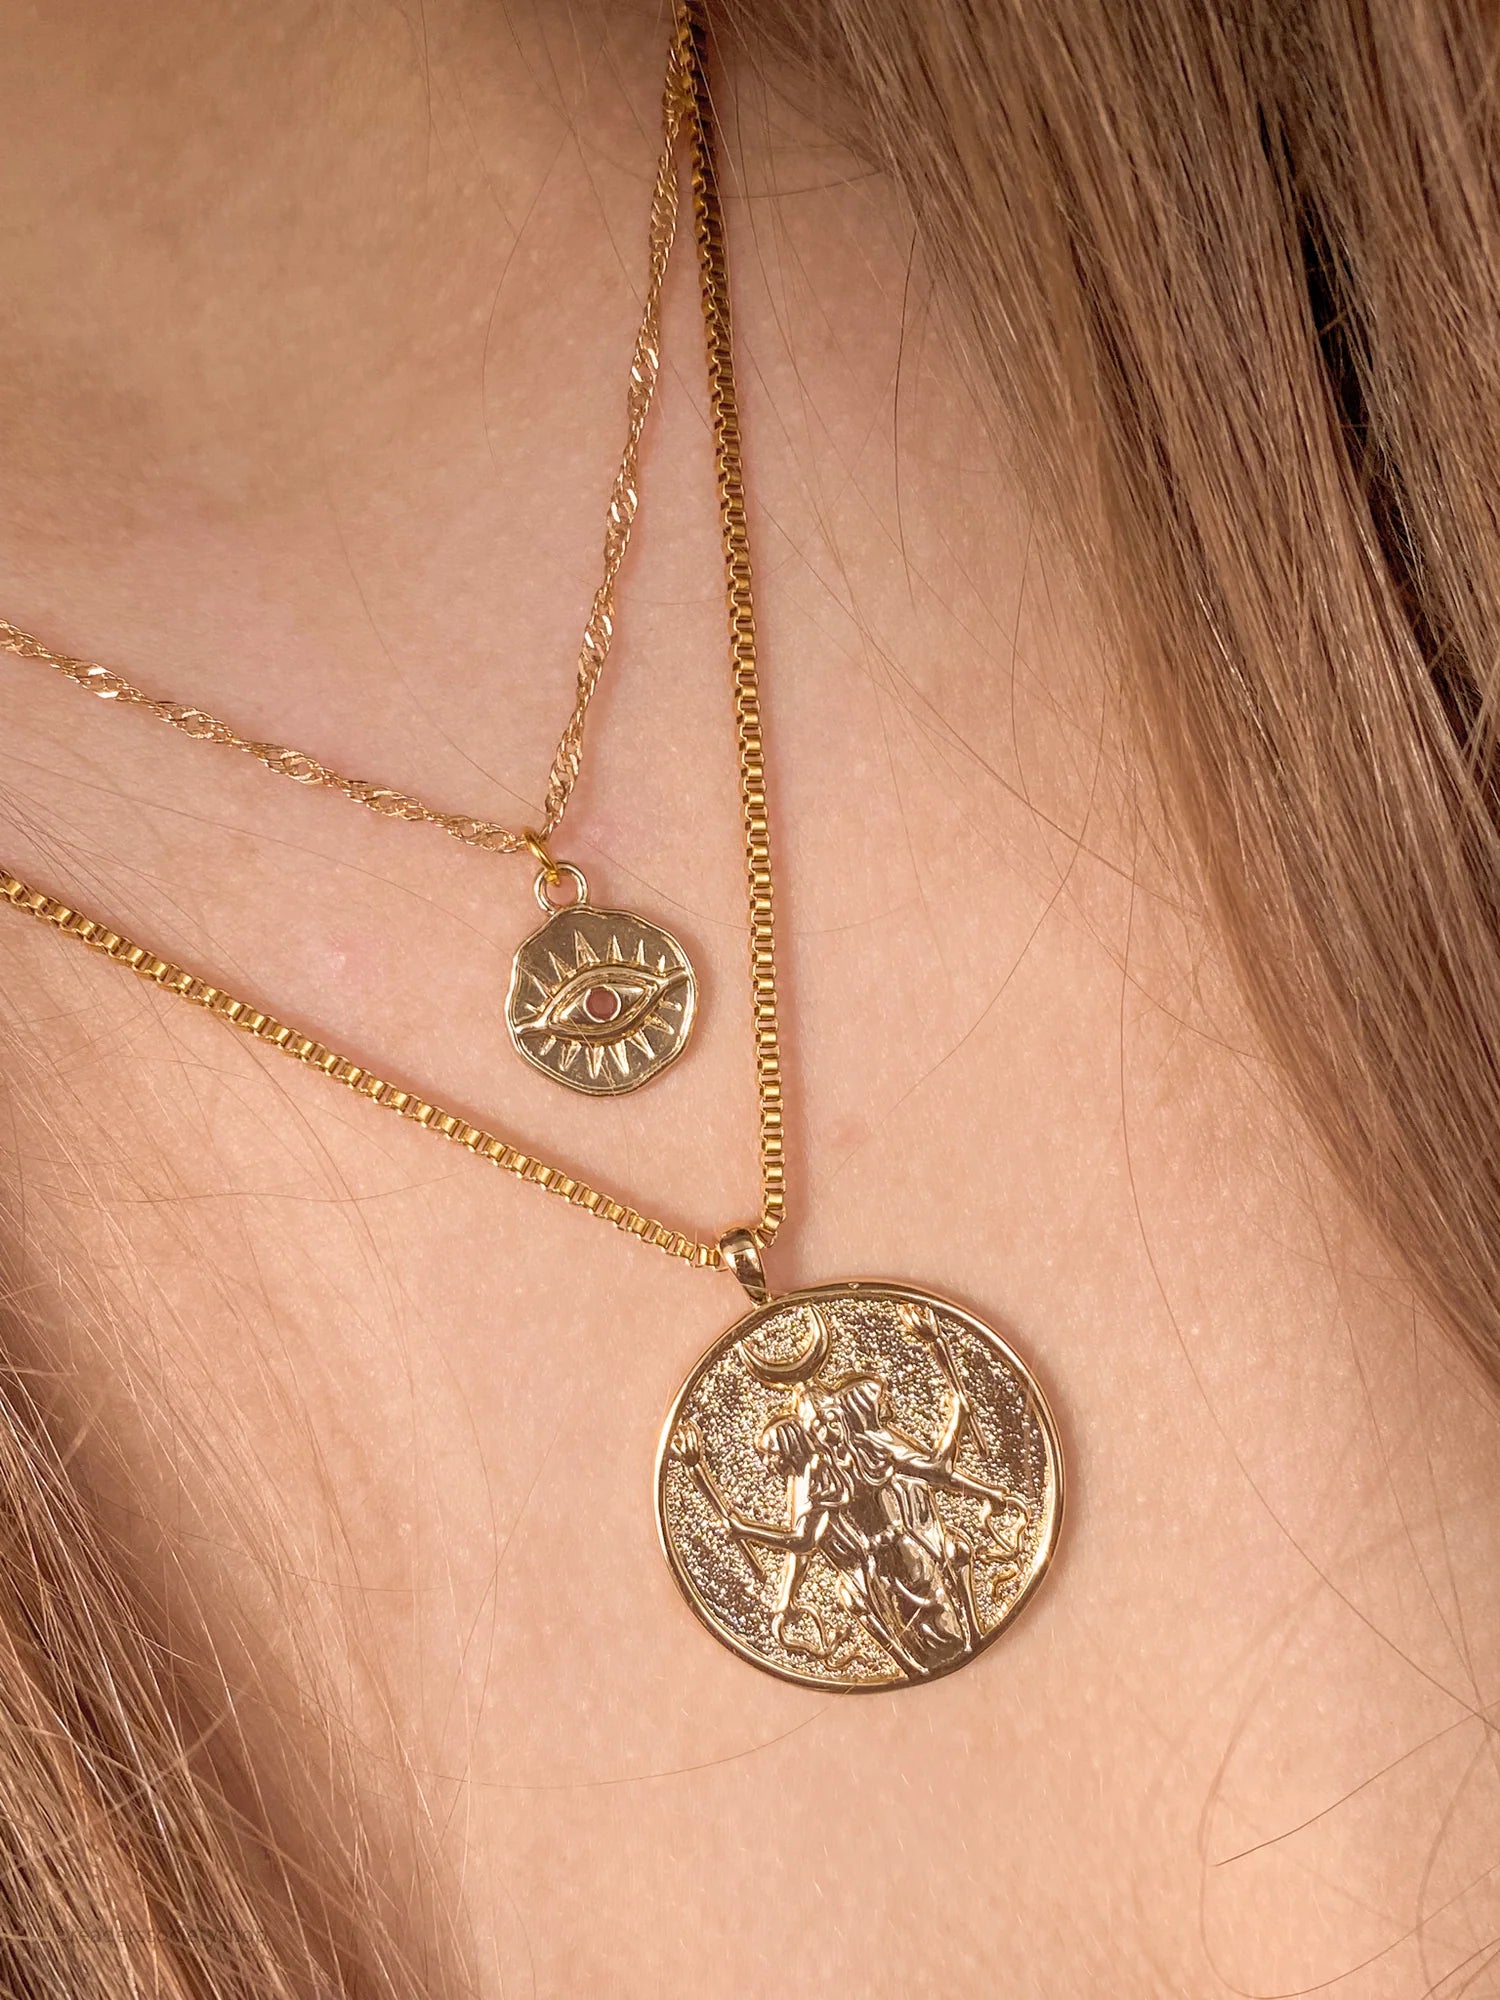 Empowered Elegance: Celebrating Women with Goddess-Inspired Gold Jewelry